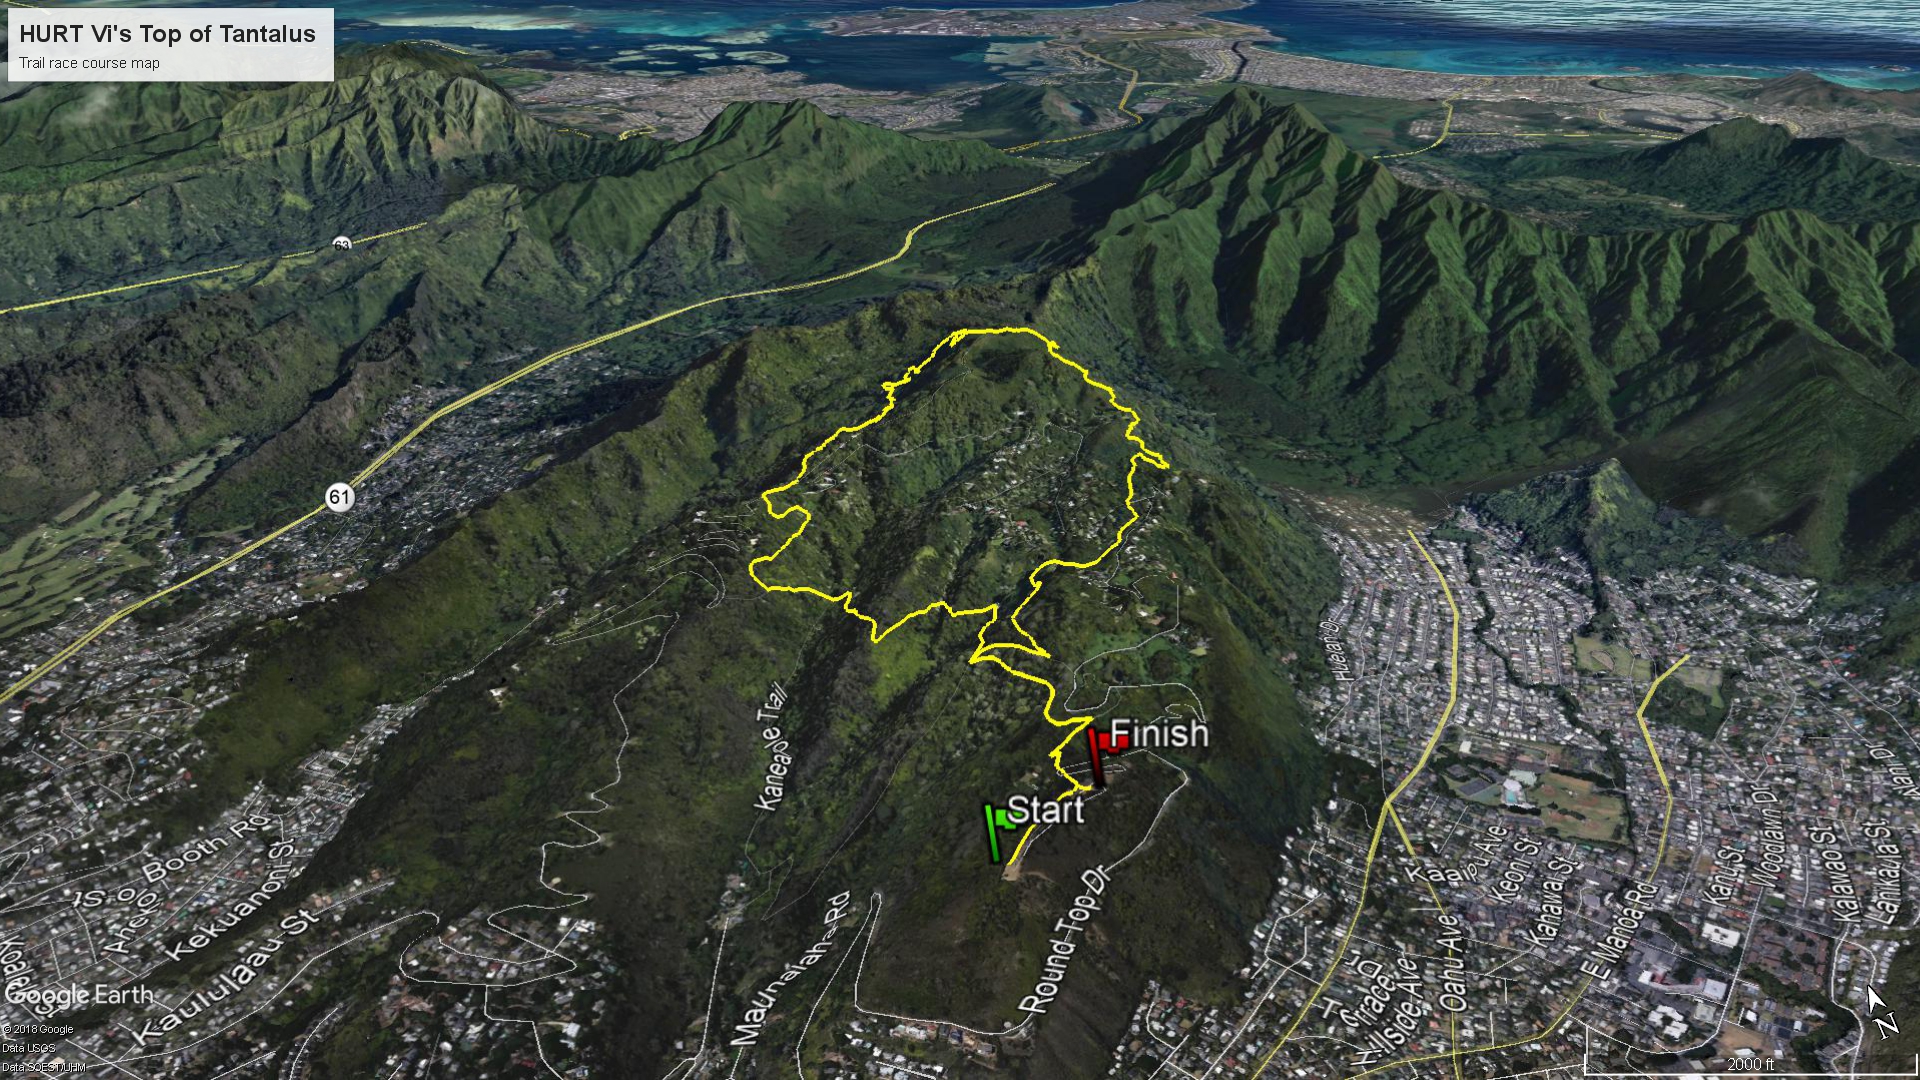 Vi’s Top Of Tantalus Race Day Instructions